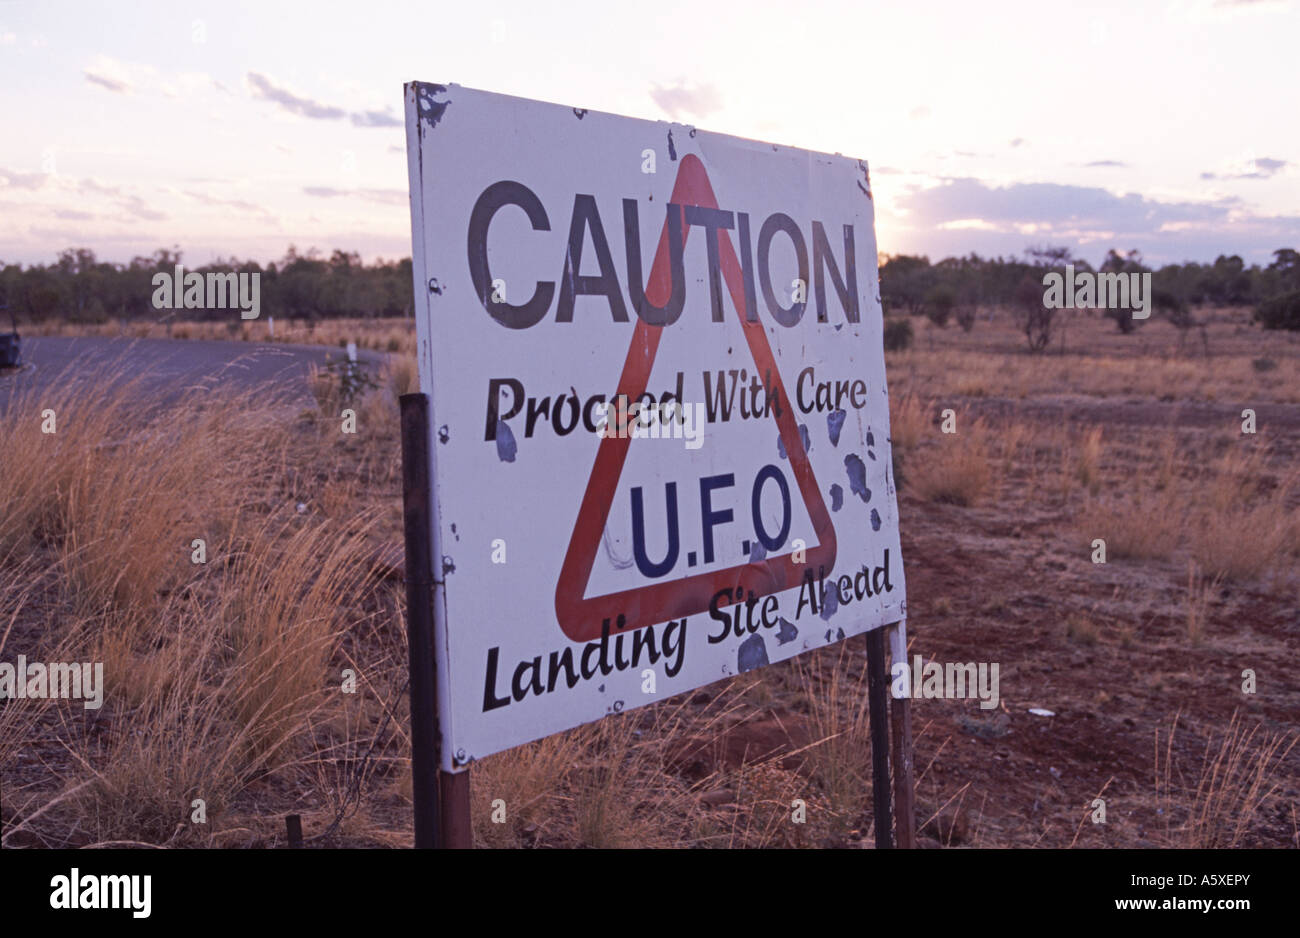 UFO sign. Wycliffe Well, Northern Territory, Australia Stock Photo